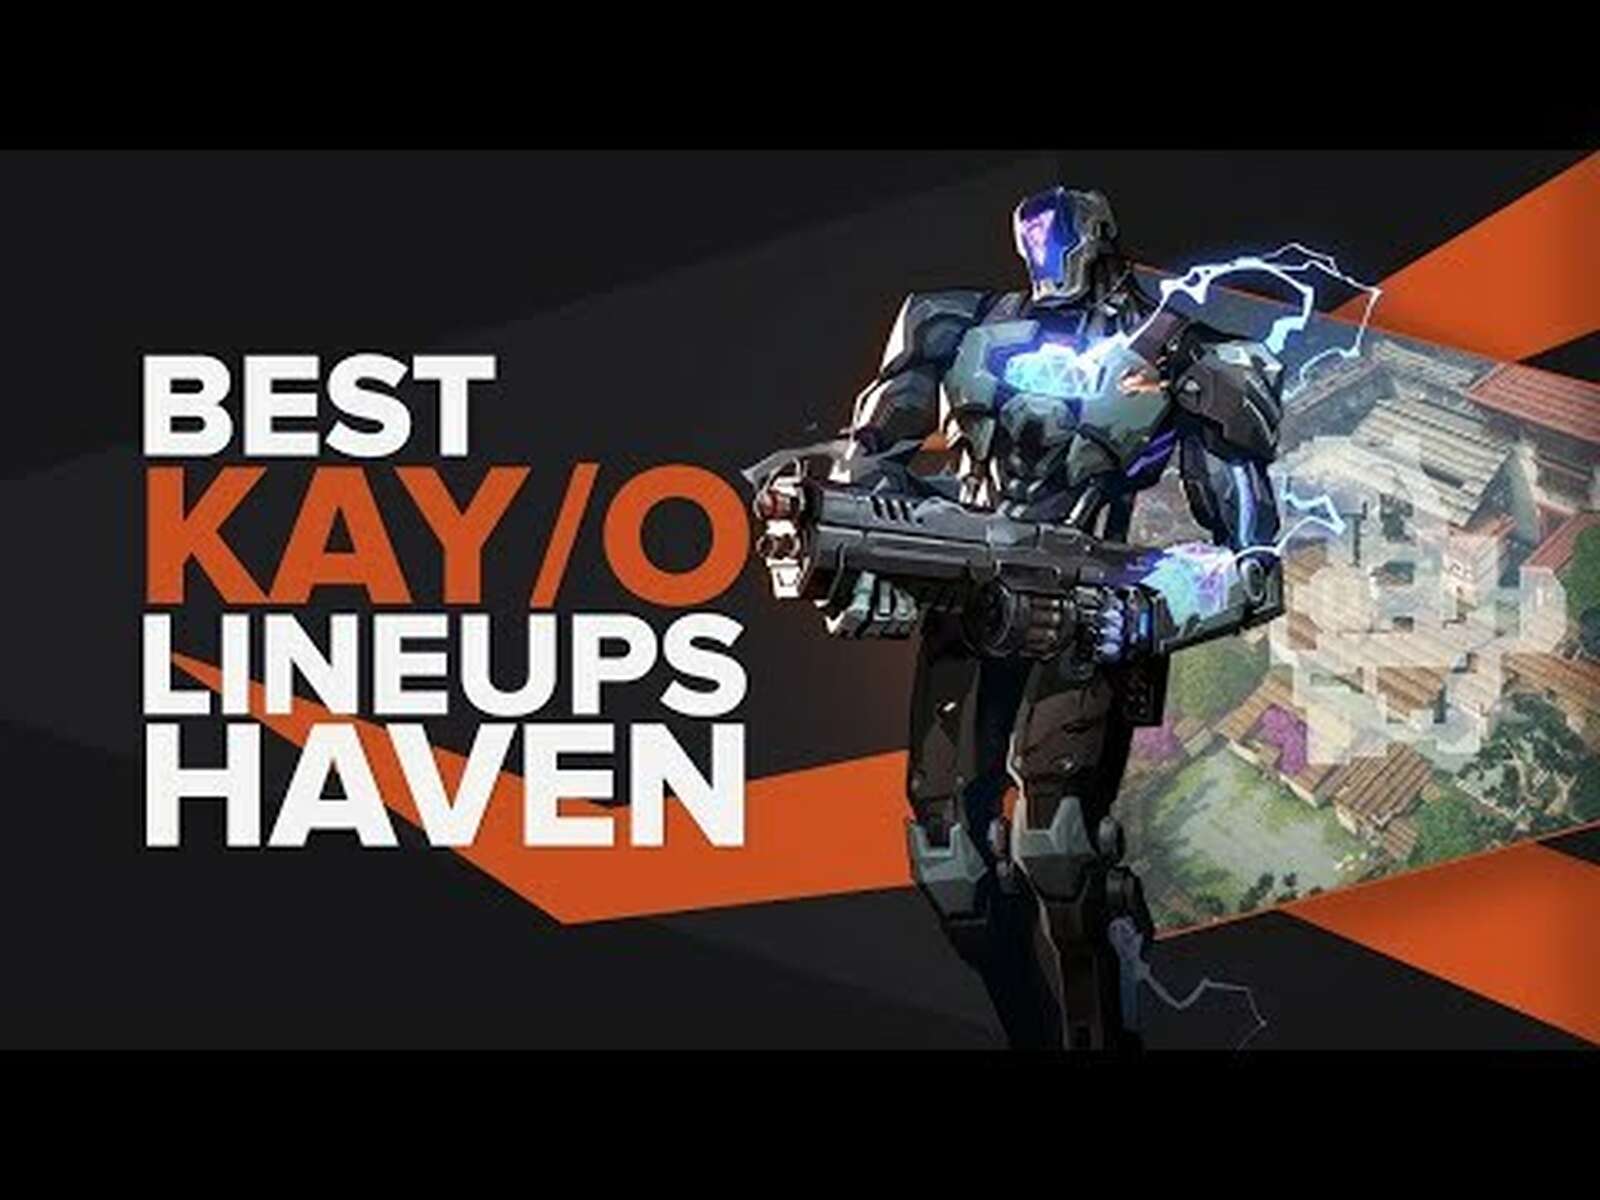 The Best KAYO Lineups on Haven